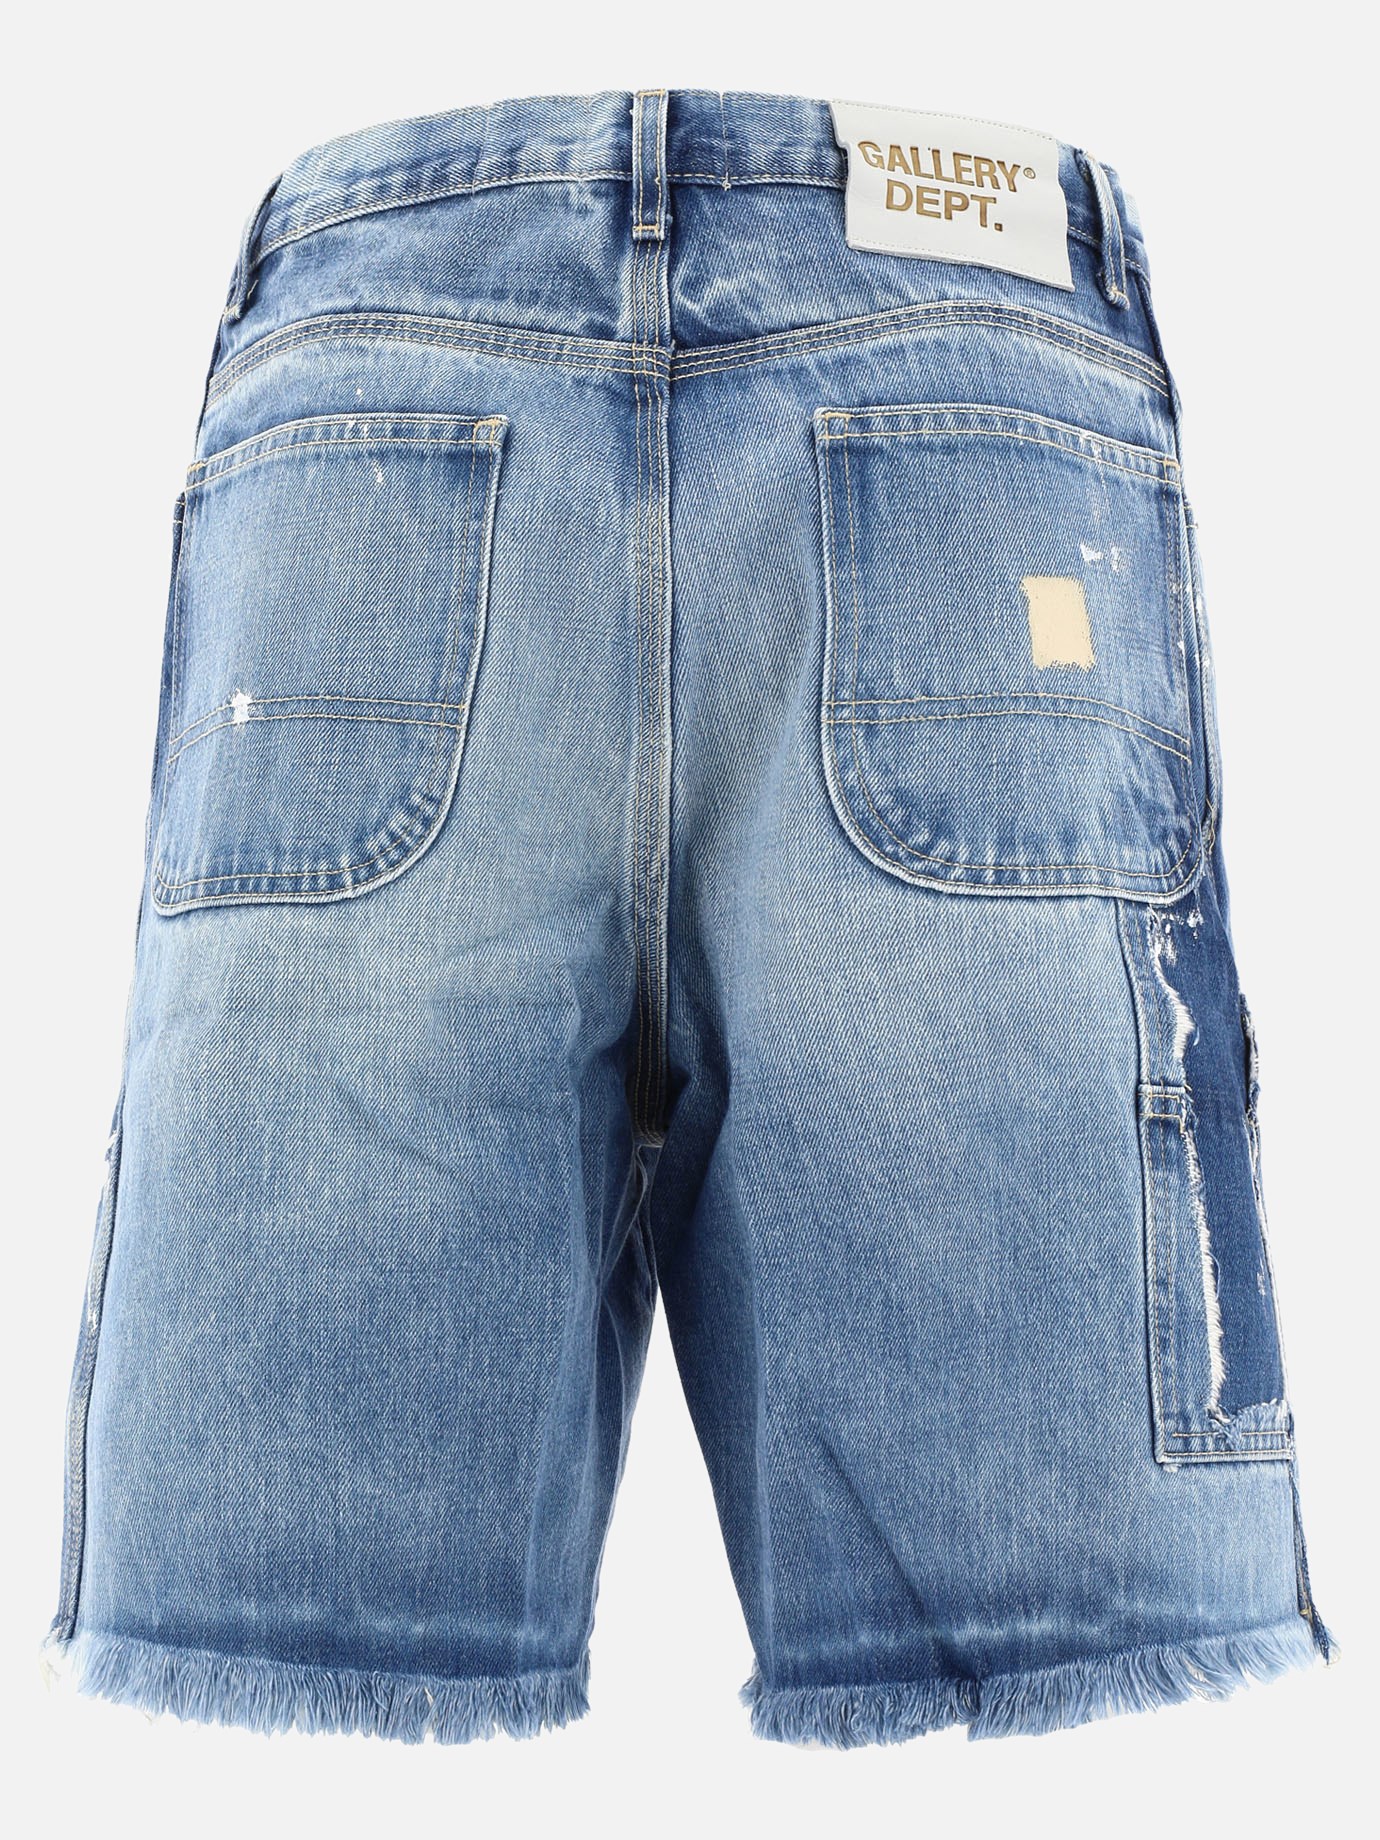  Carpenter  shorts by Gallery Dept.